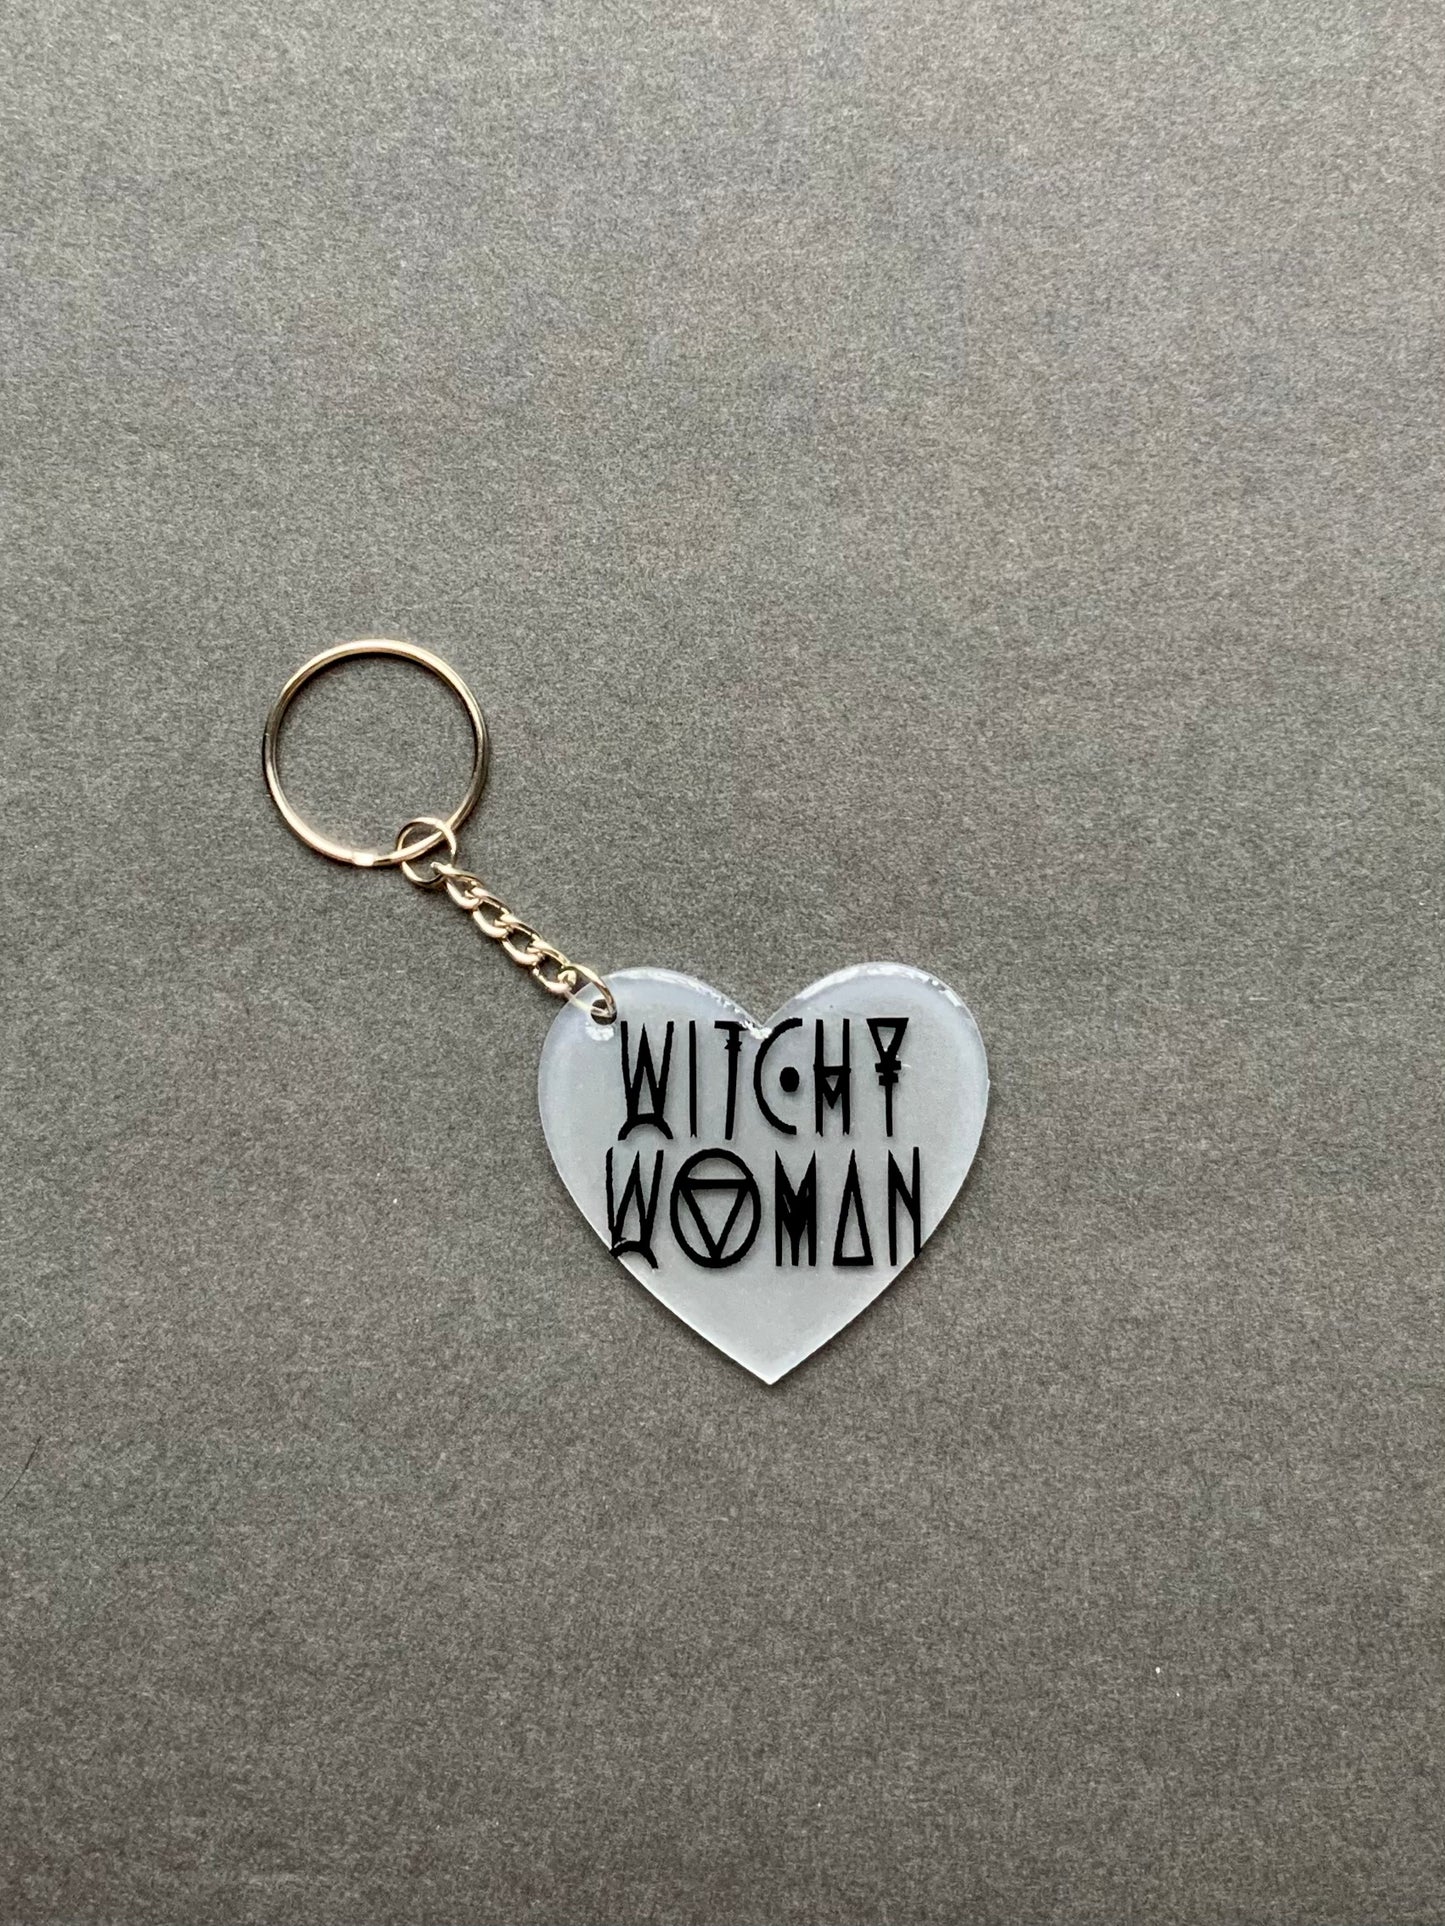 WItchy Woman Key Chain